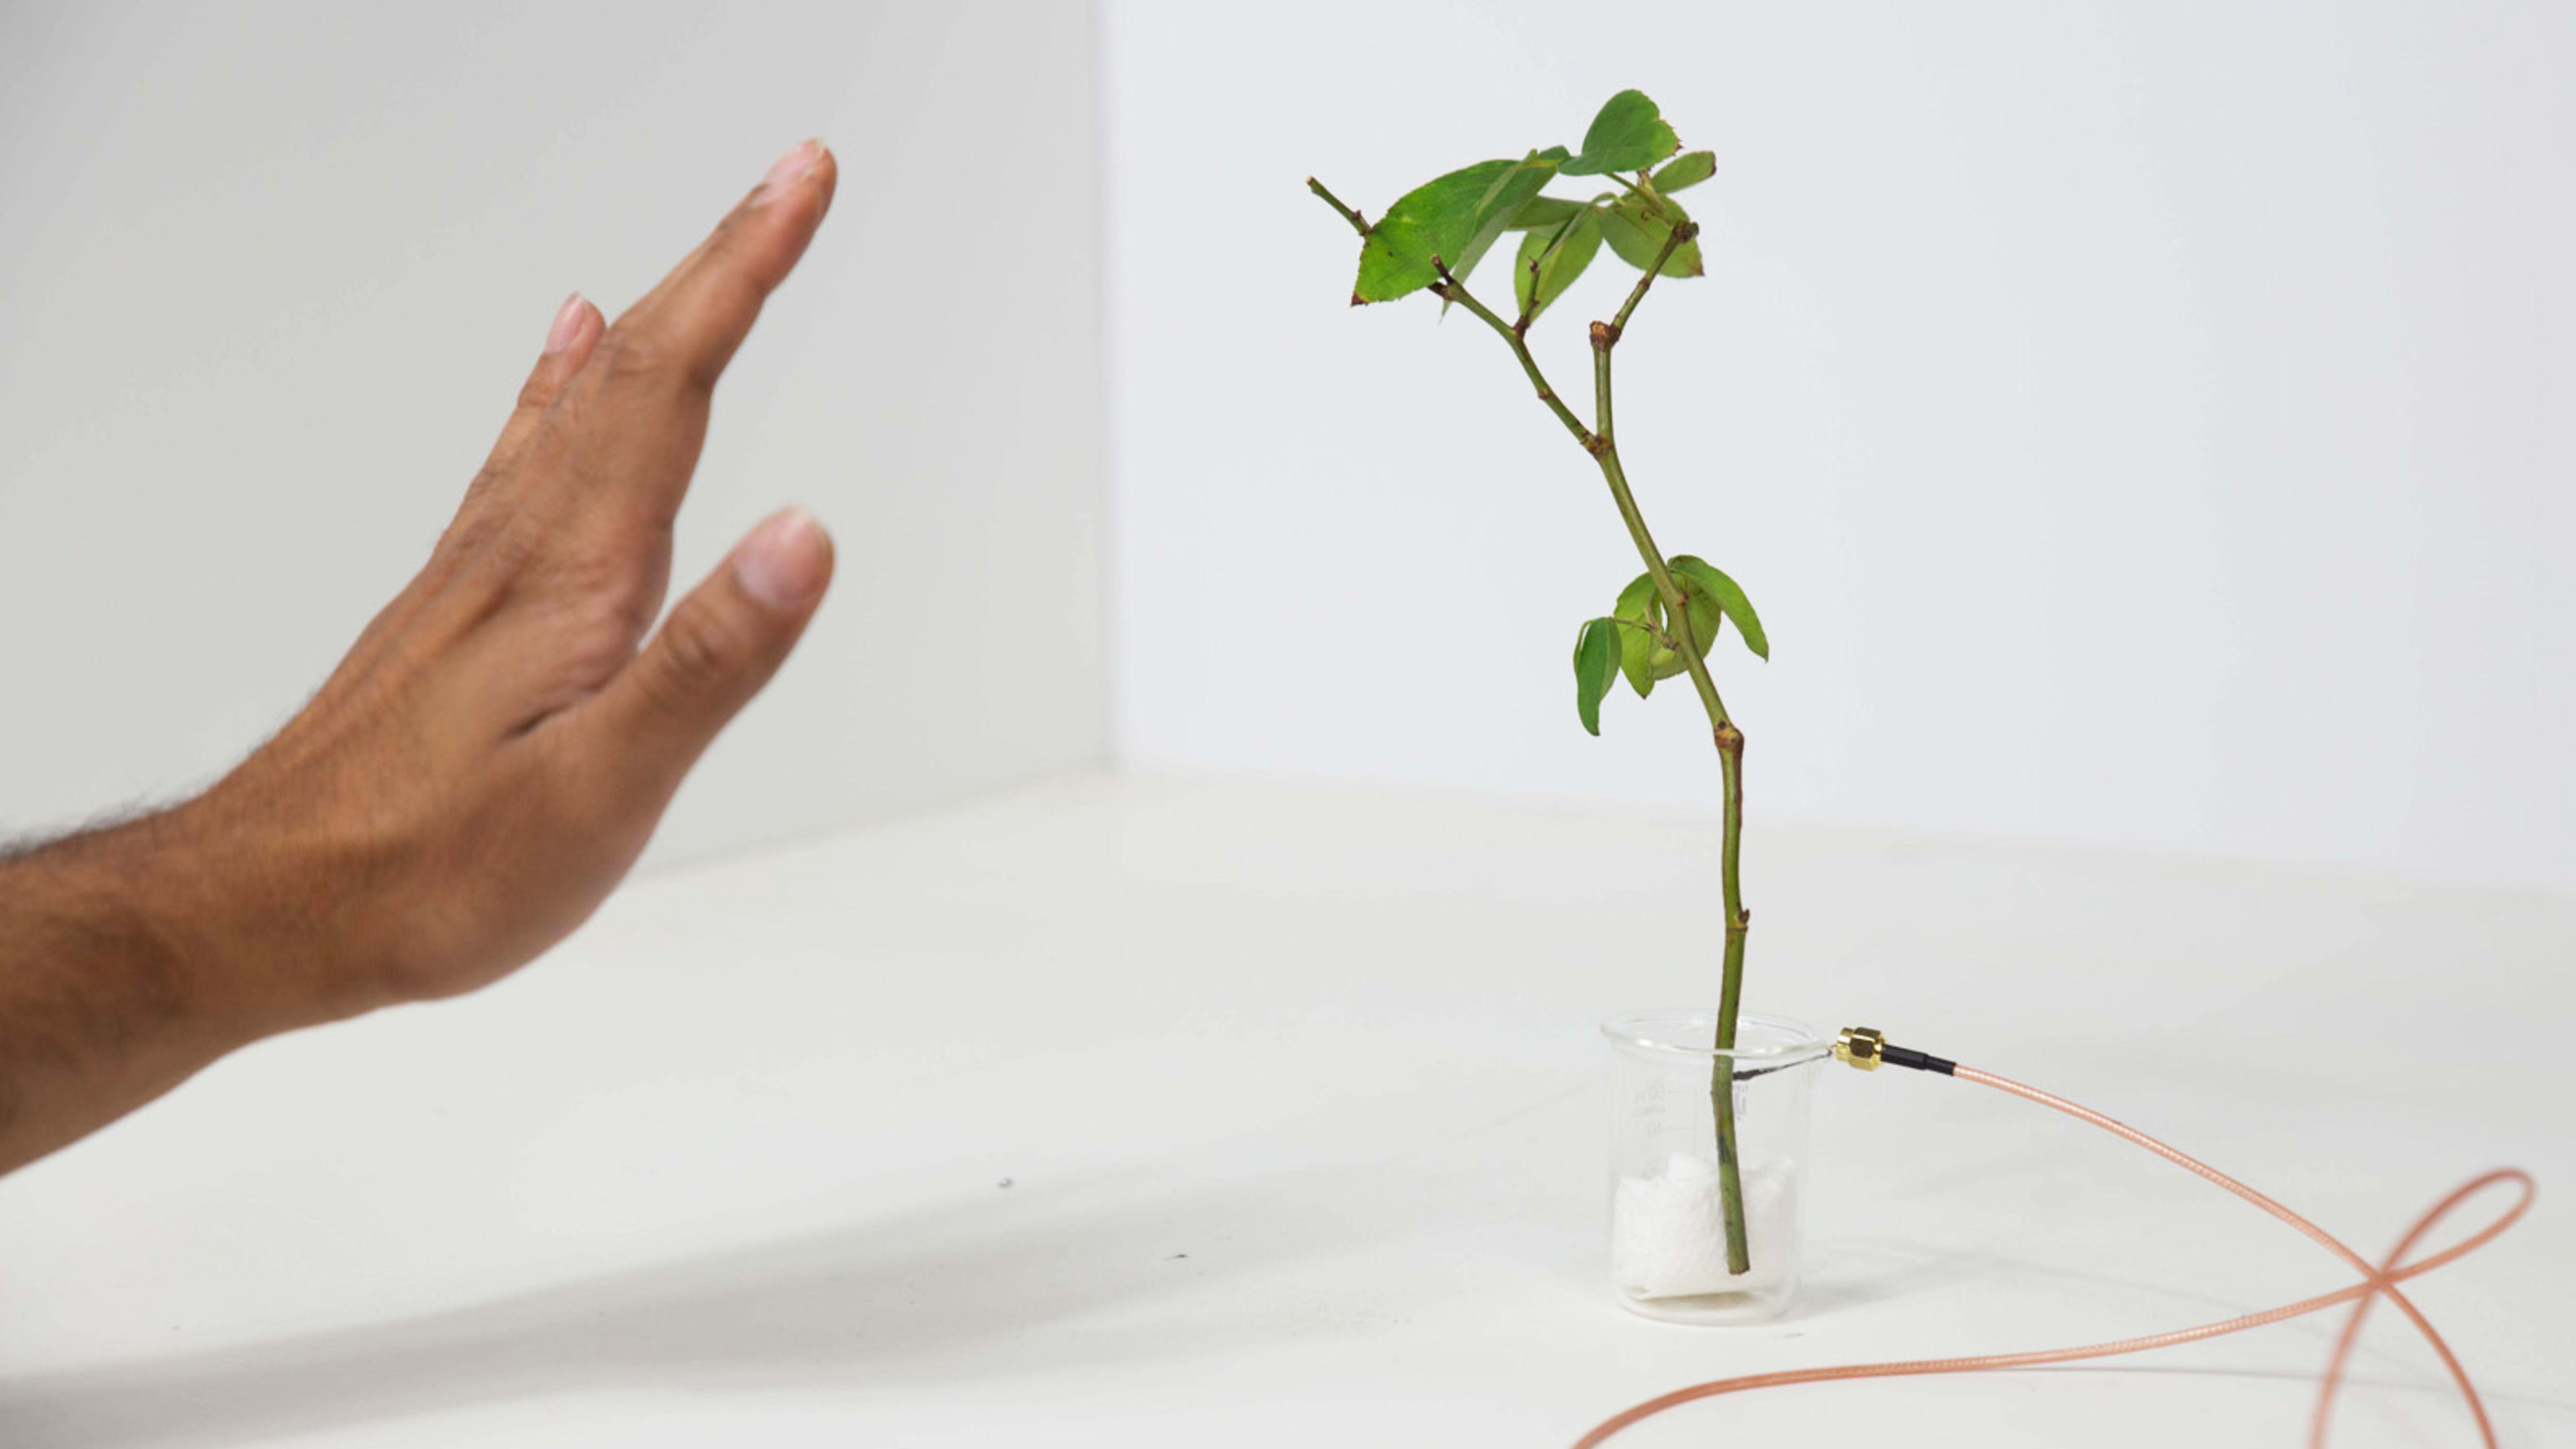 Plants are the oldest sensors in the world. Could they be the future of computers?